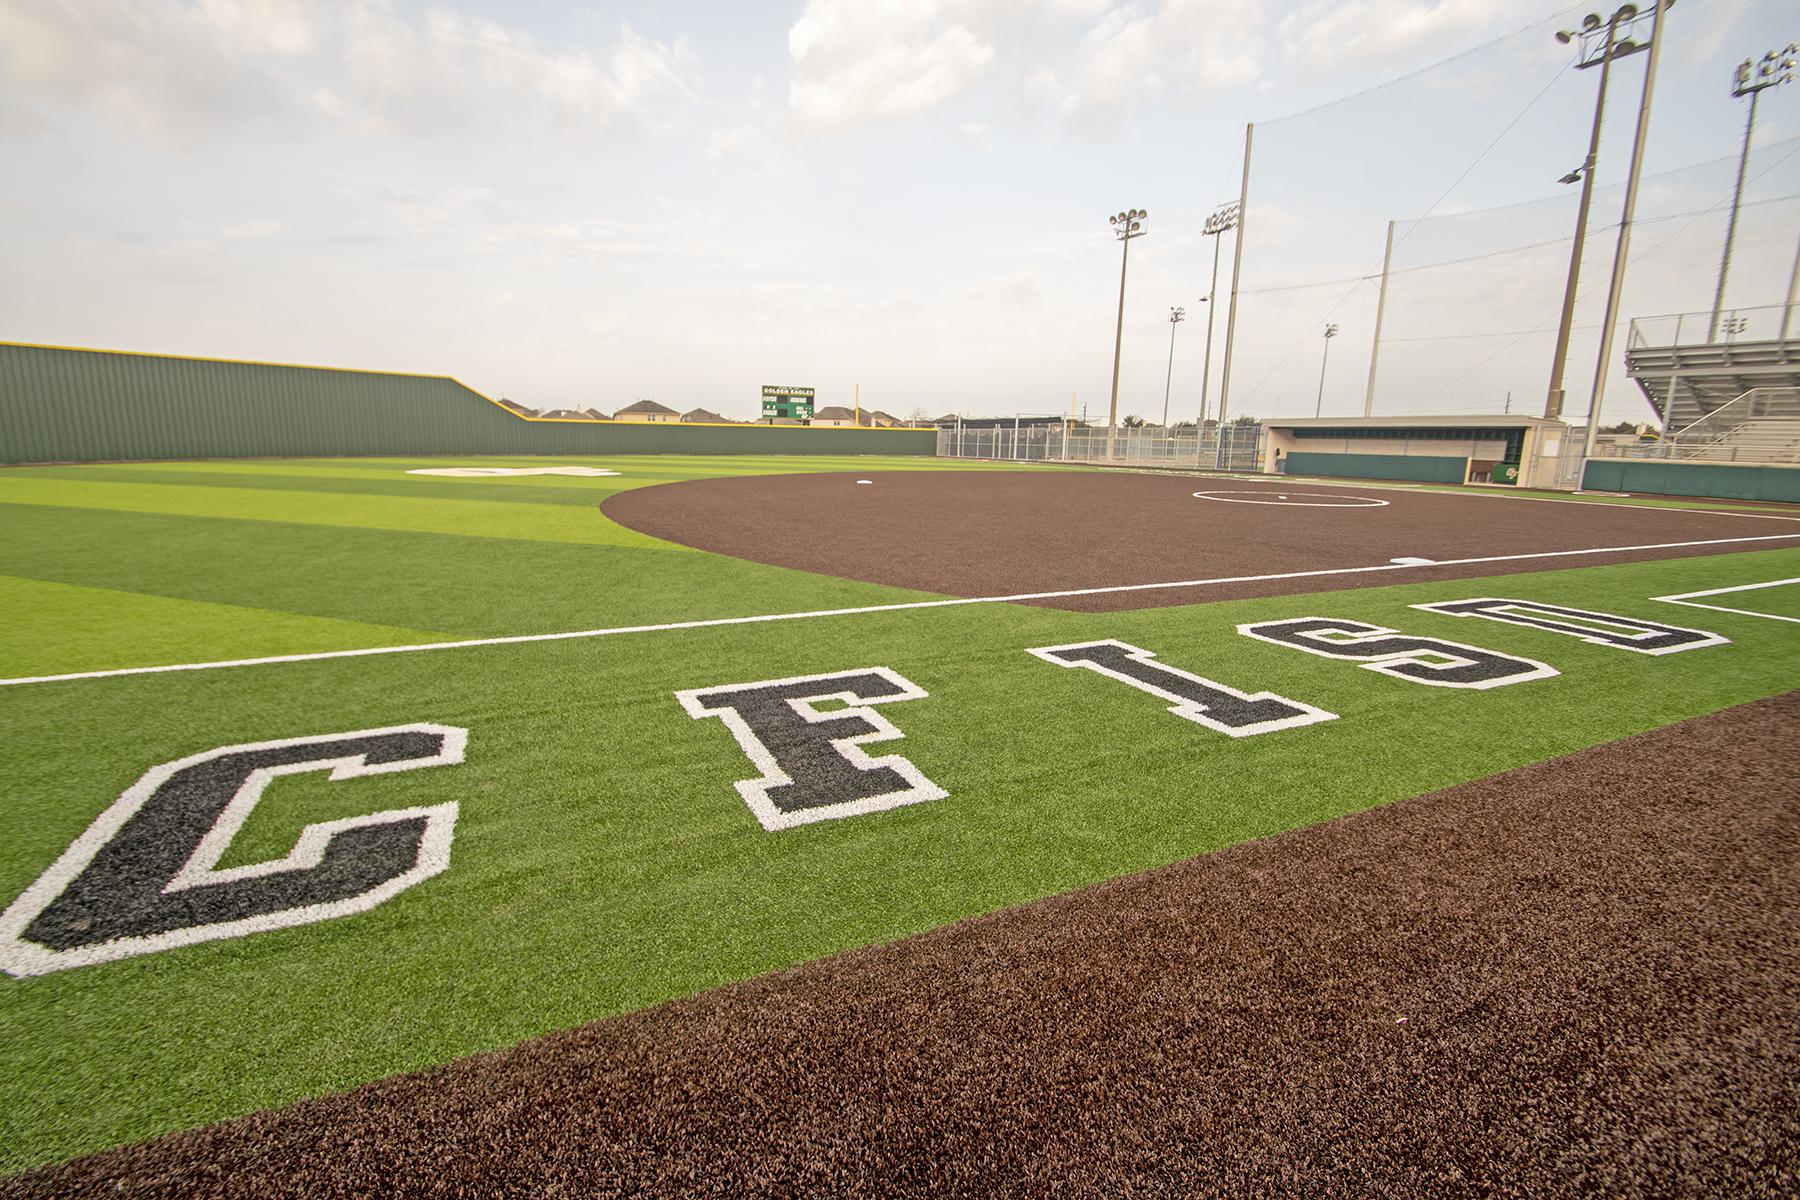 Phase one of CyFair ISD’s baseball and softball field renovations complete